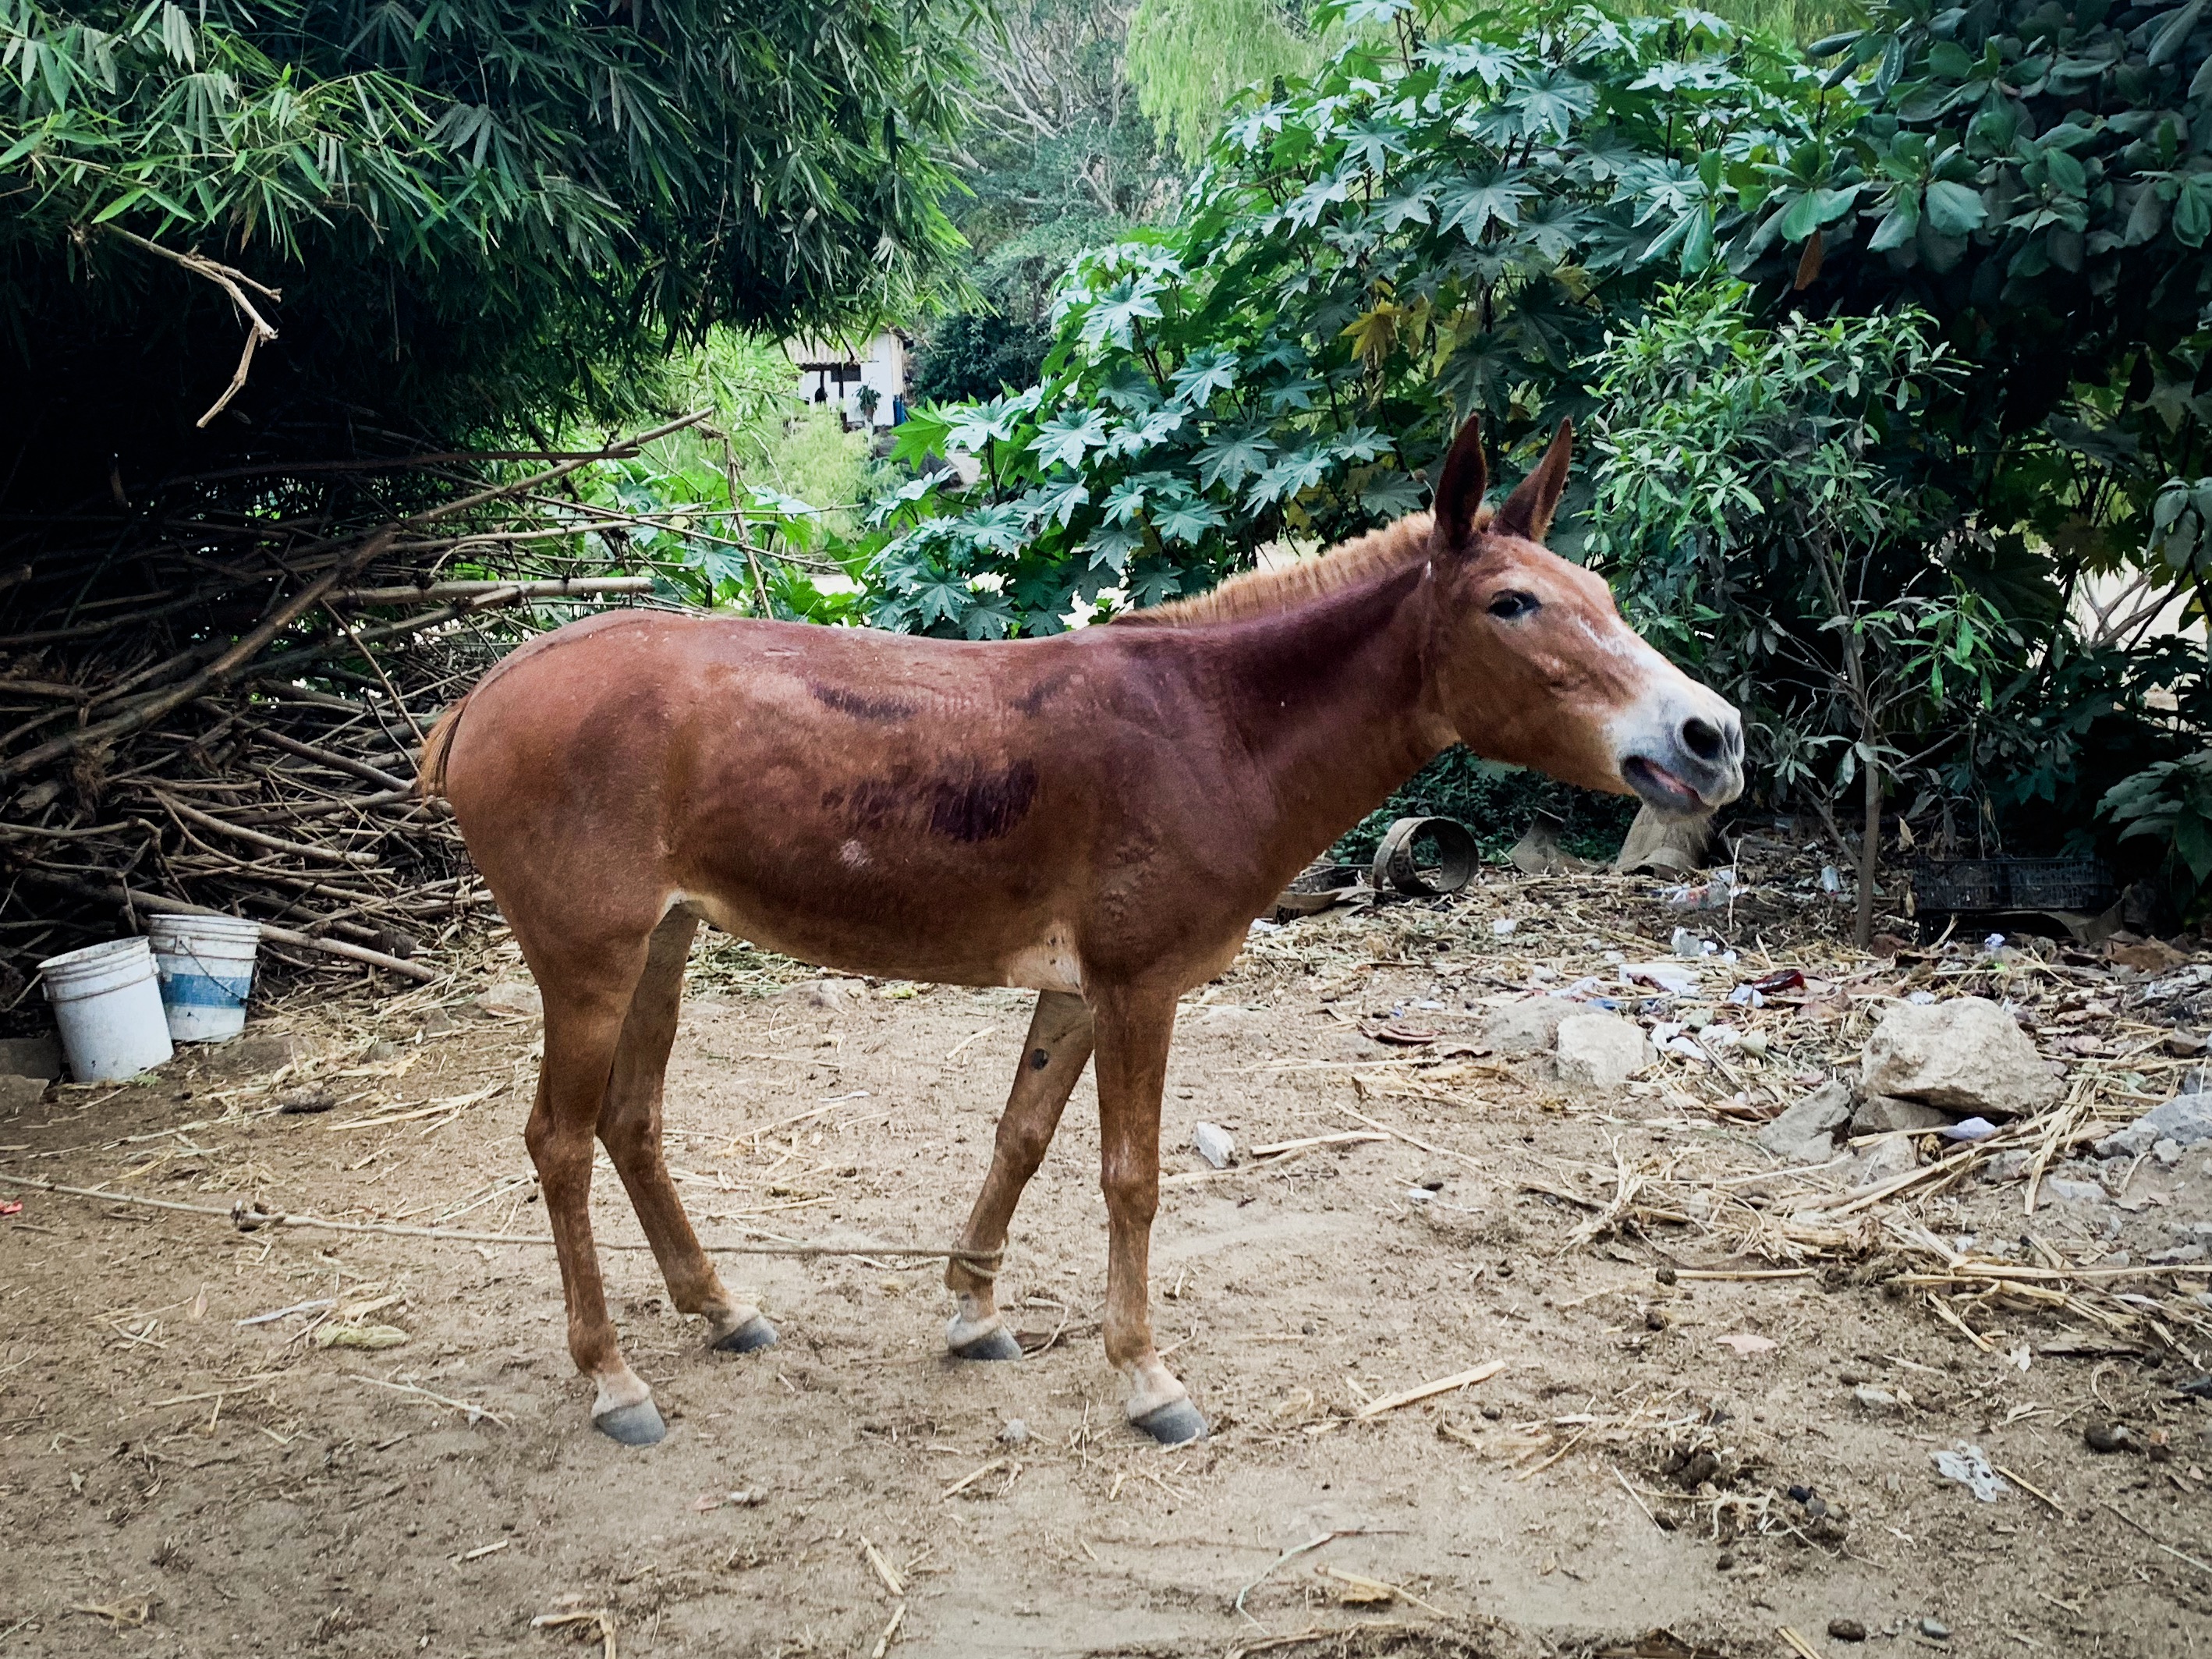 A mule near the river bed in Yelapa